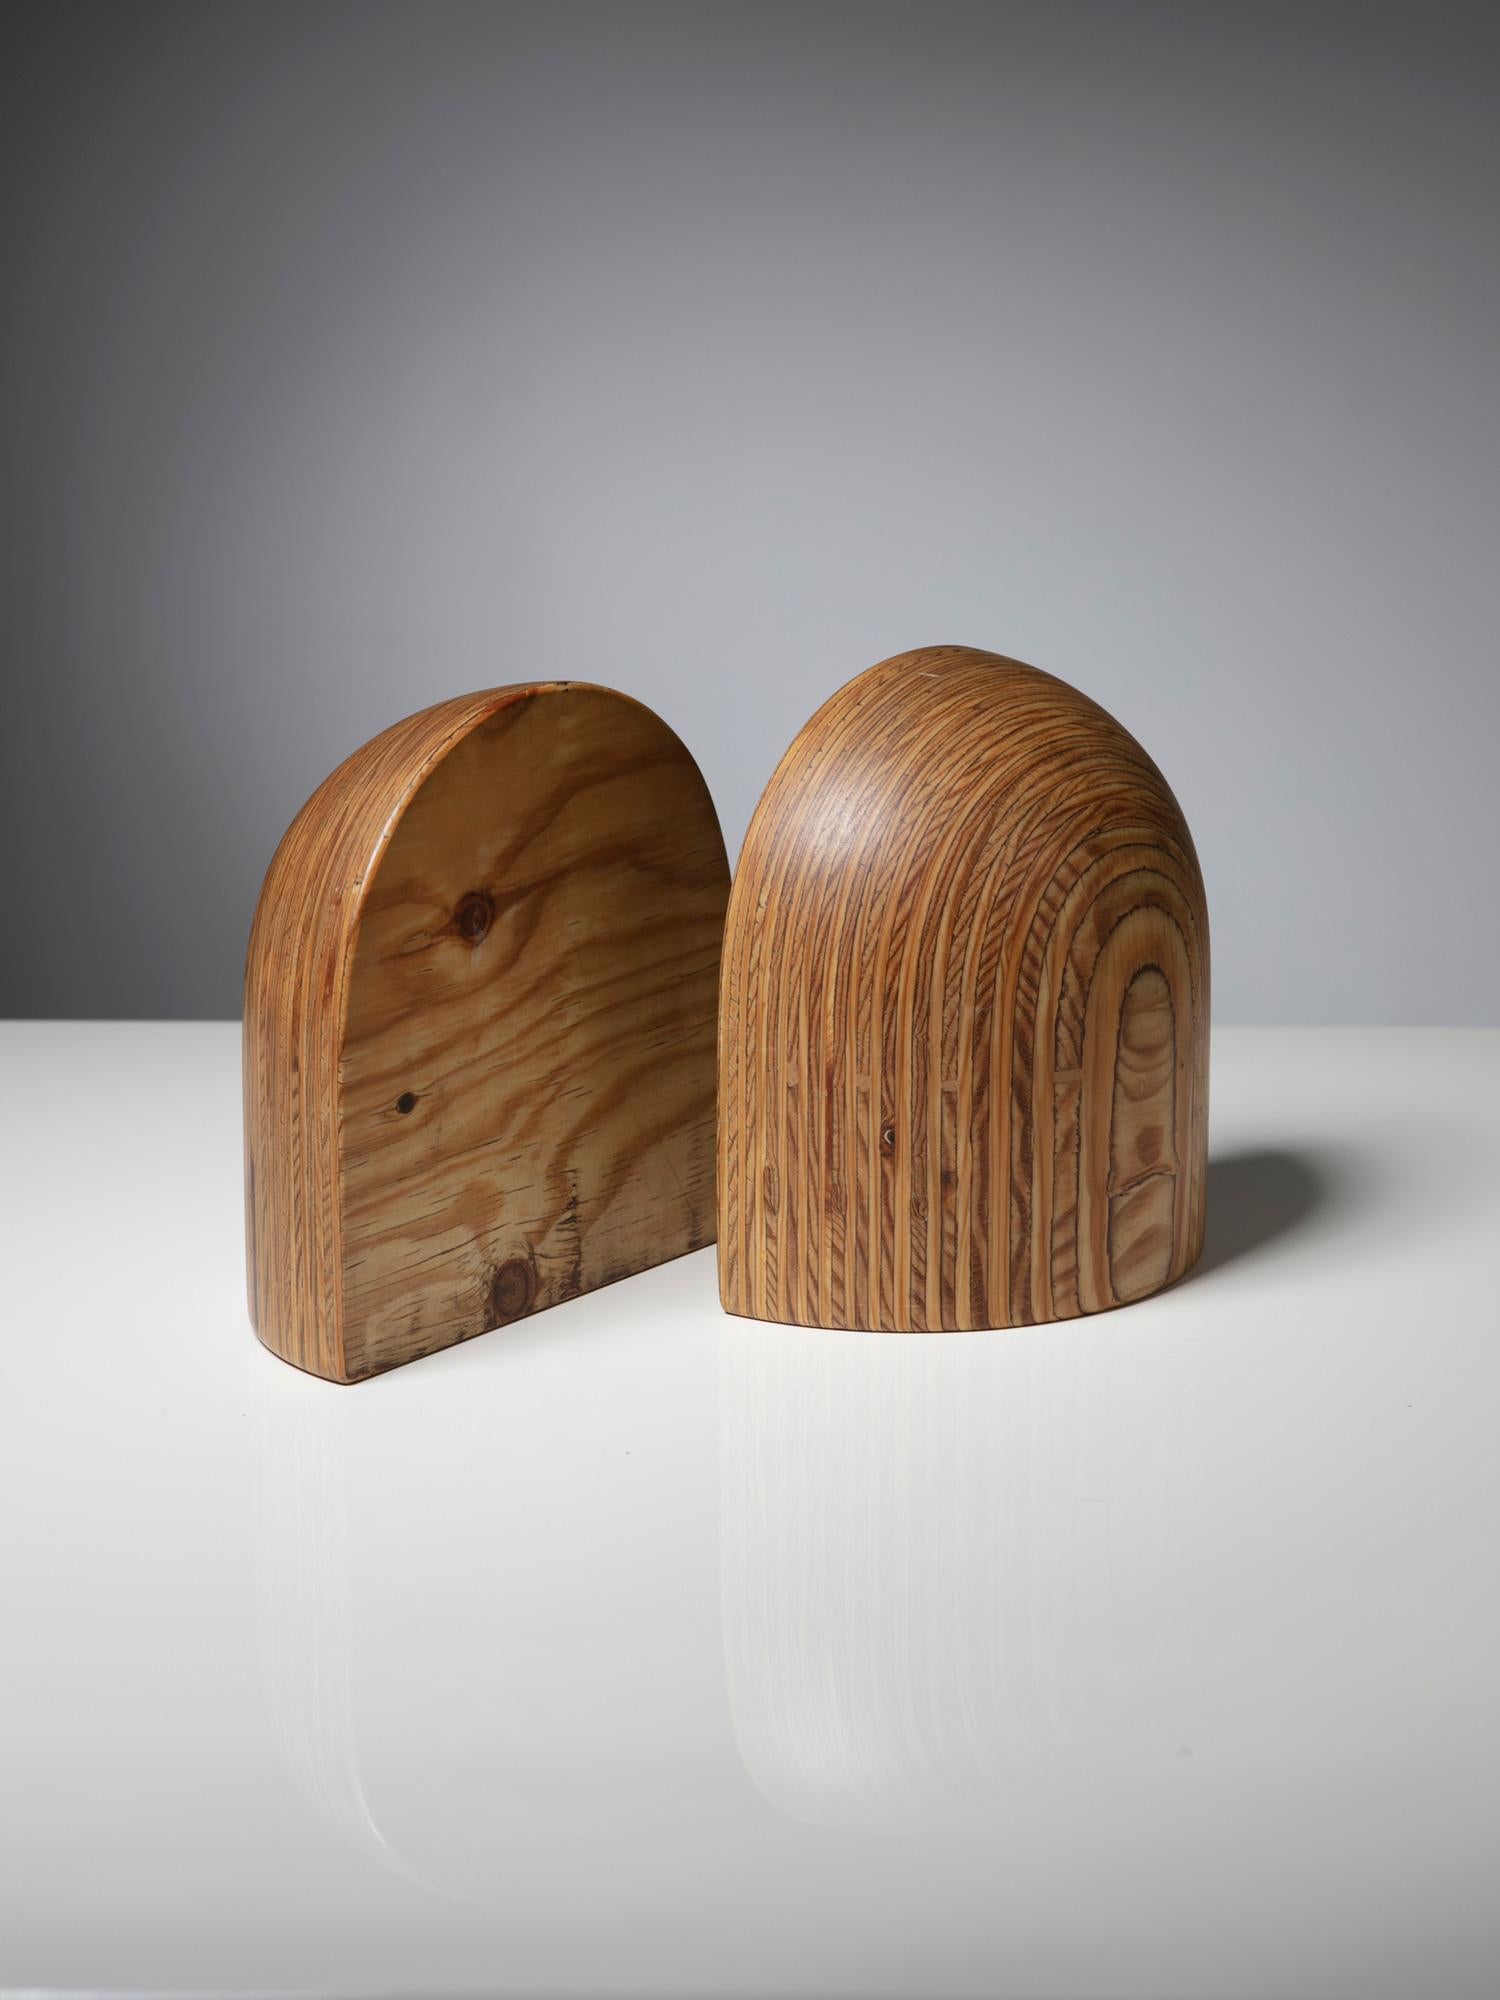 Rare set of wood bookends by Pino Pedano.
  